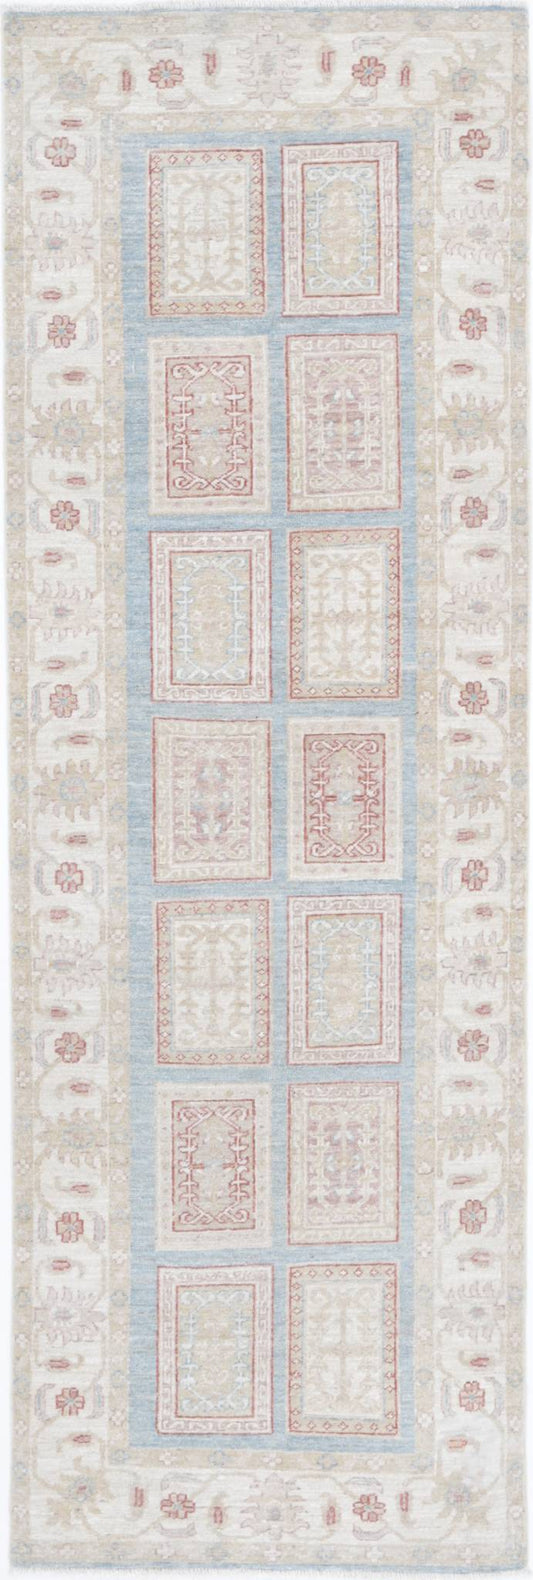 Traditional Hand Knotted Serenity Farhan Wool Rug of Size 2'7'' X 8'2'' in Blue and Ivory Colors - Made in Afghanistan